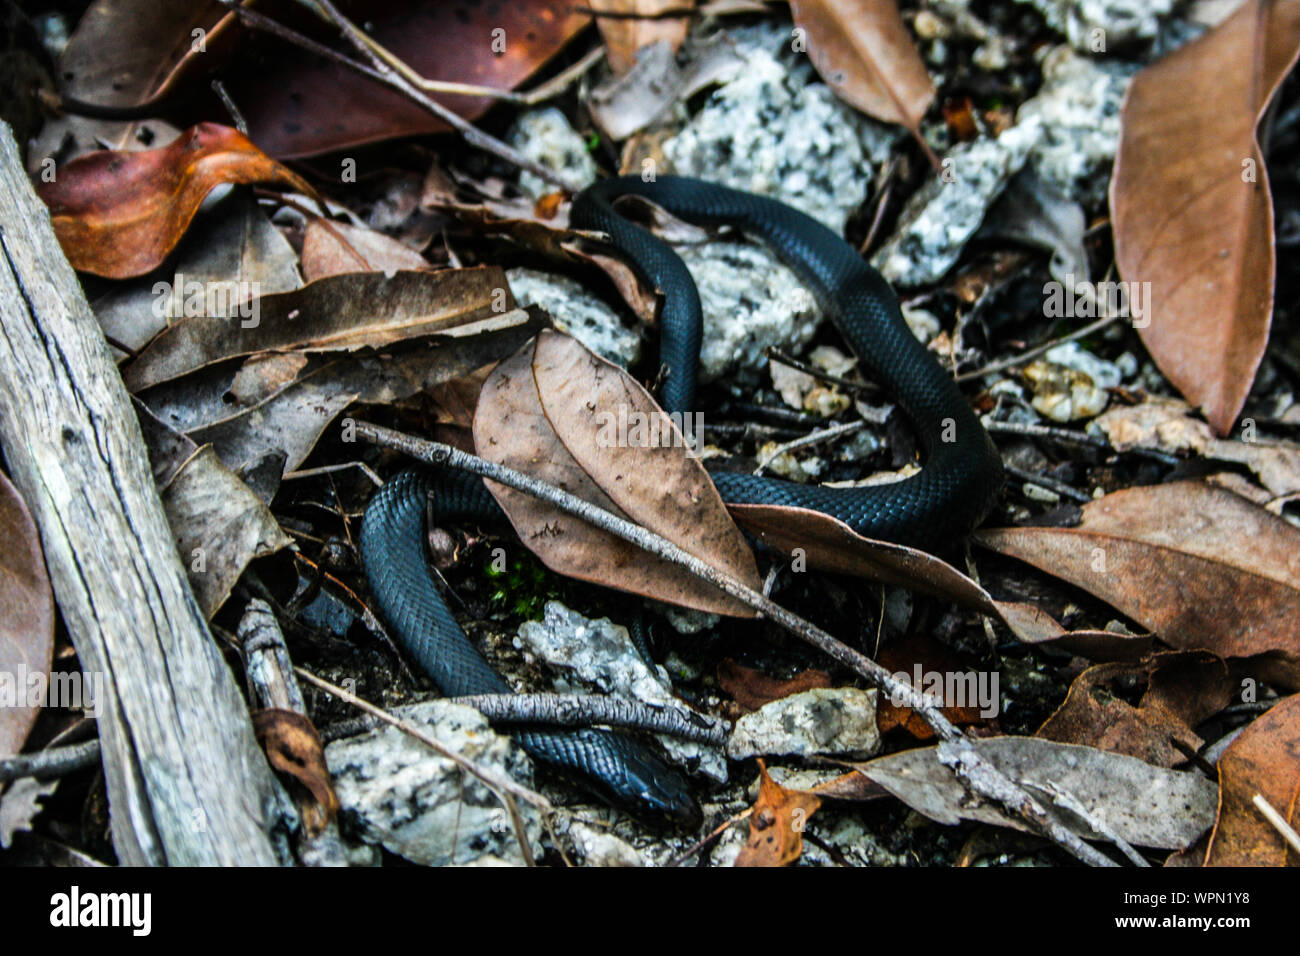 Snakes of the Cairns region, Environment